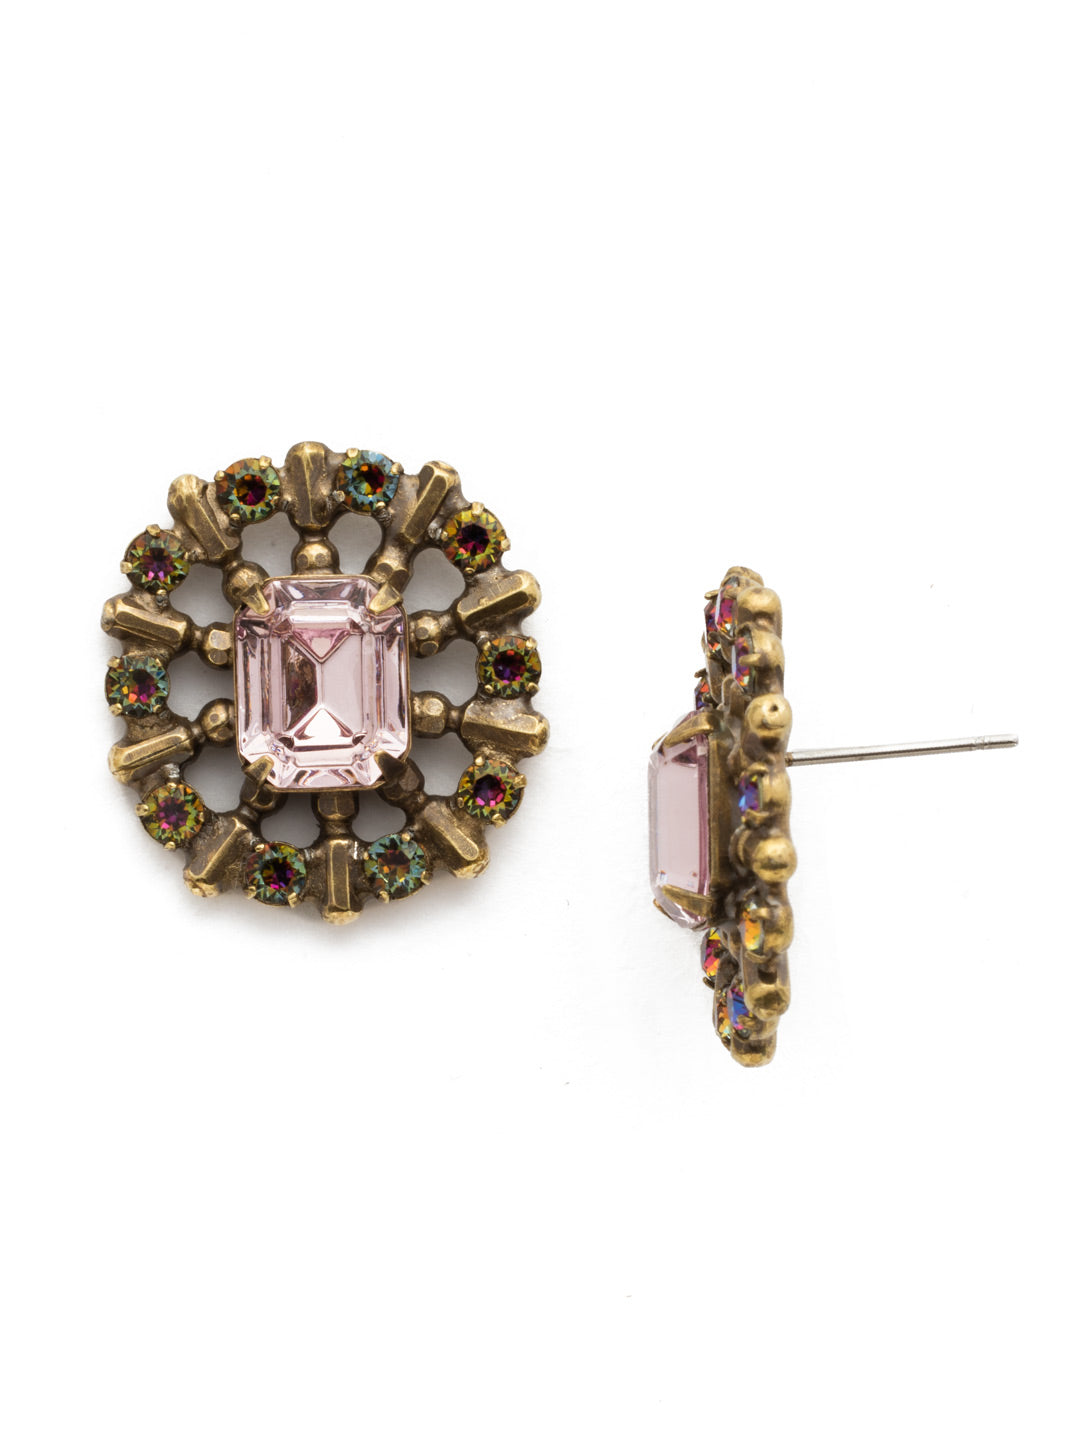 Abelia Earring - EDW60AGROP - <p>A square octagon stone is at the heart of this fun post earring! Metal spokes lead to an outer circle encrusted with small round crystals. From Sorrelli's Royal Plum collection in our Antique Gold-tone finish.</p>